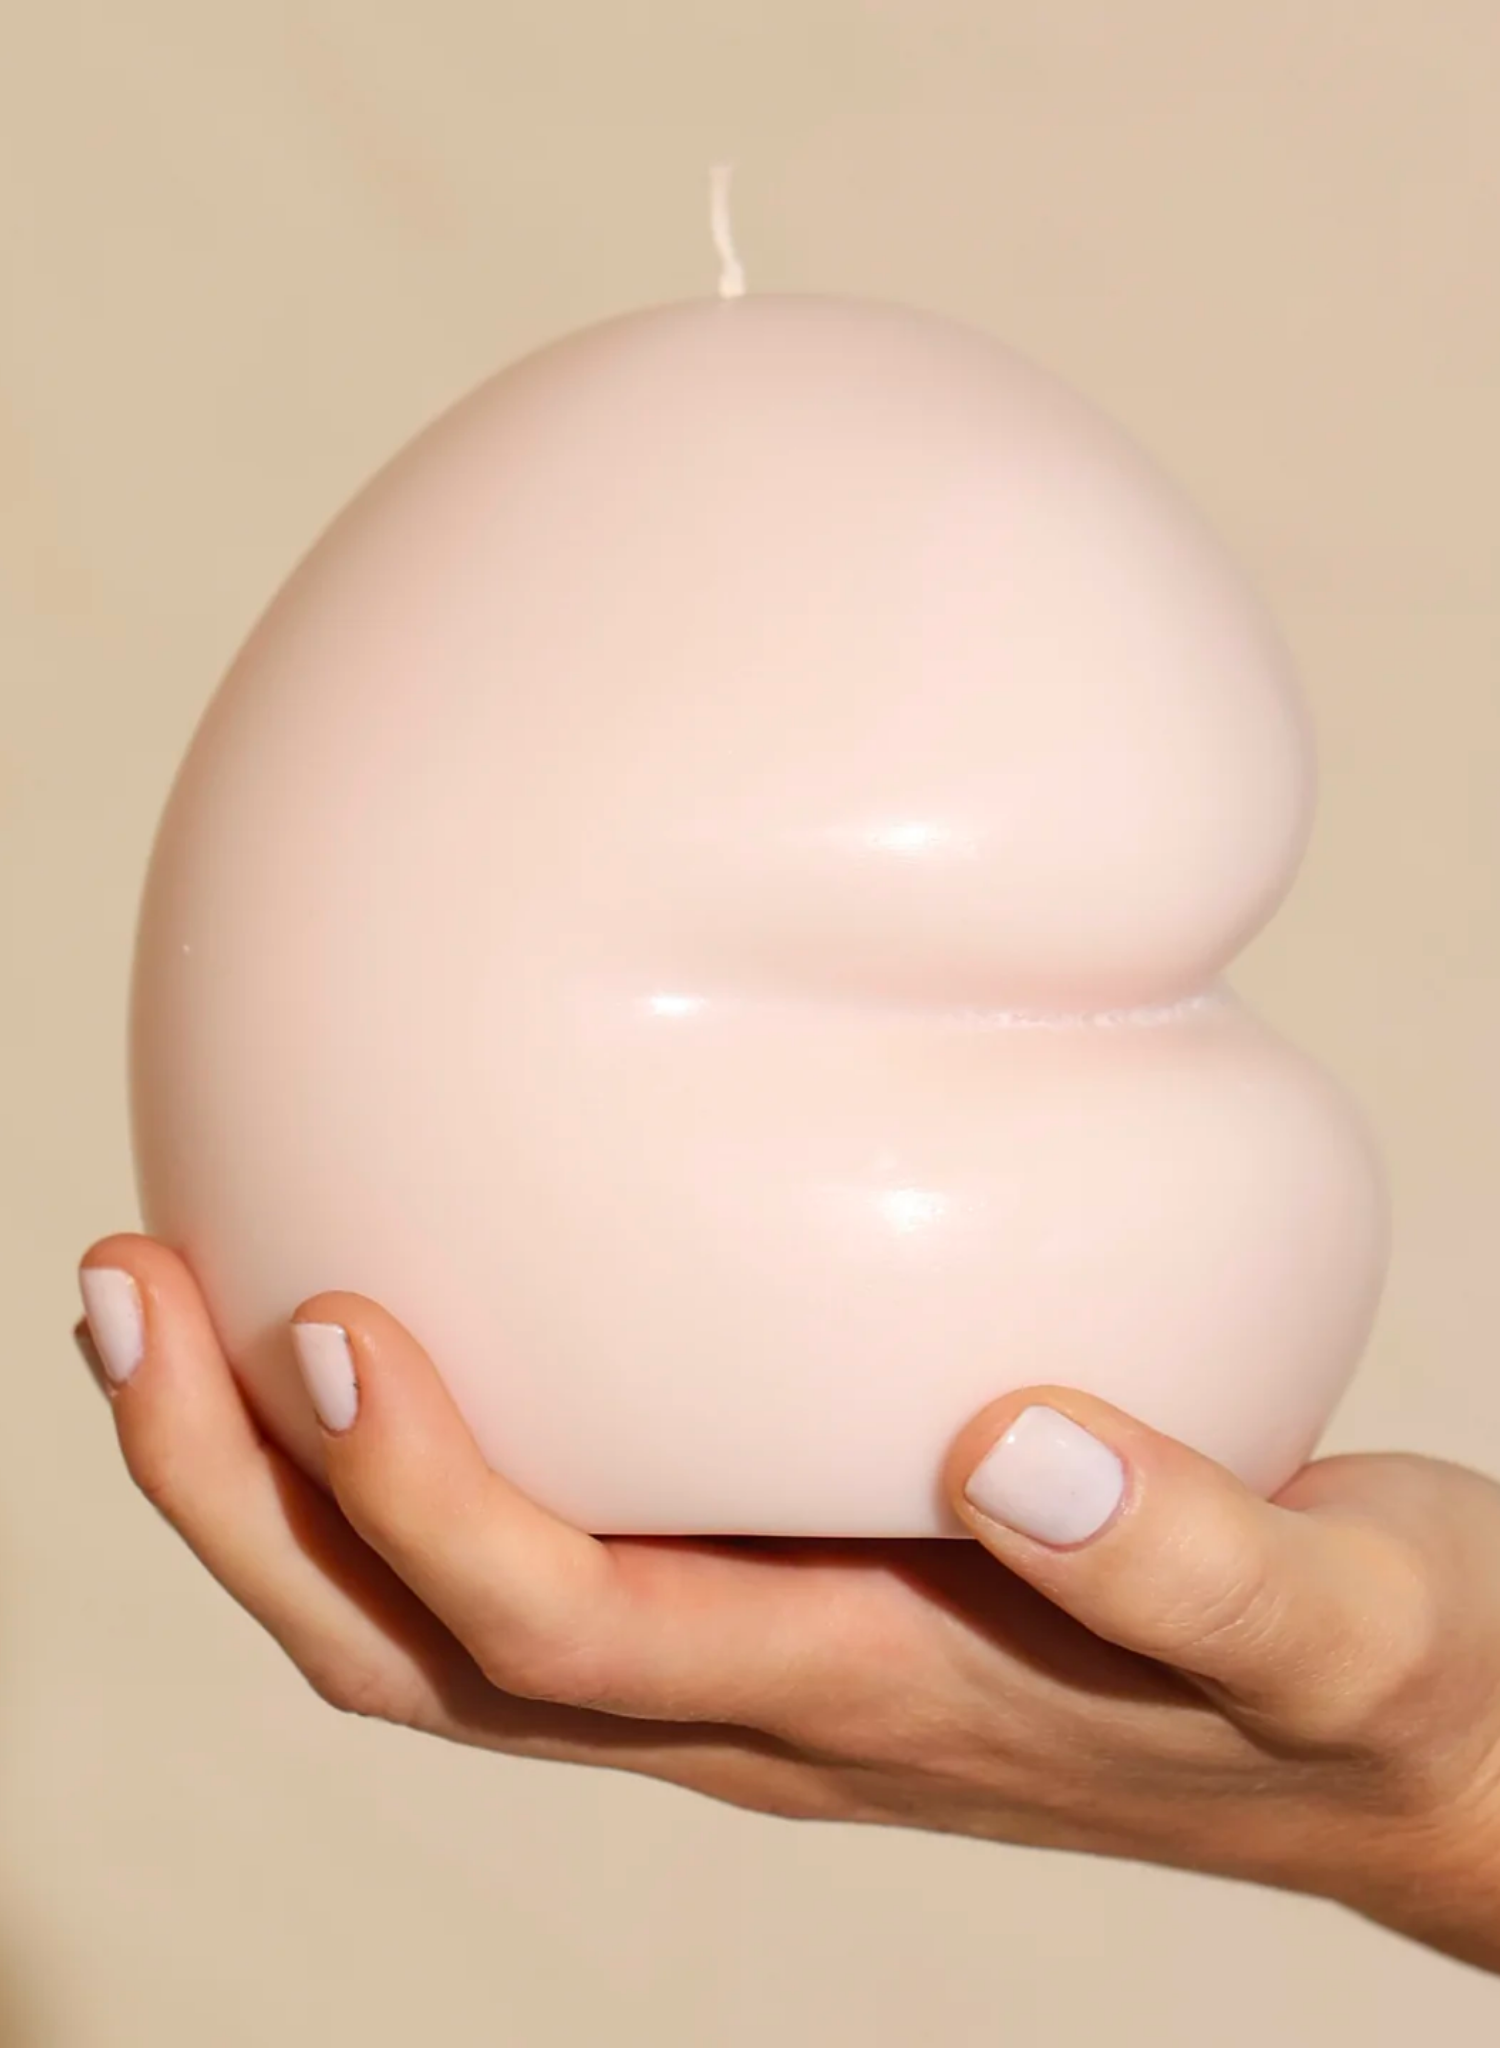 The asymmetrical Tulum Blobbies in Blush candle is cute and curious all at once, for seriously stylish home decor that doesn’t take itself too seriously.